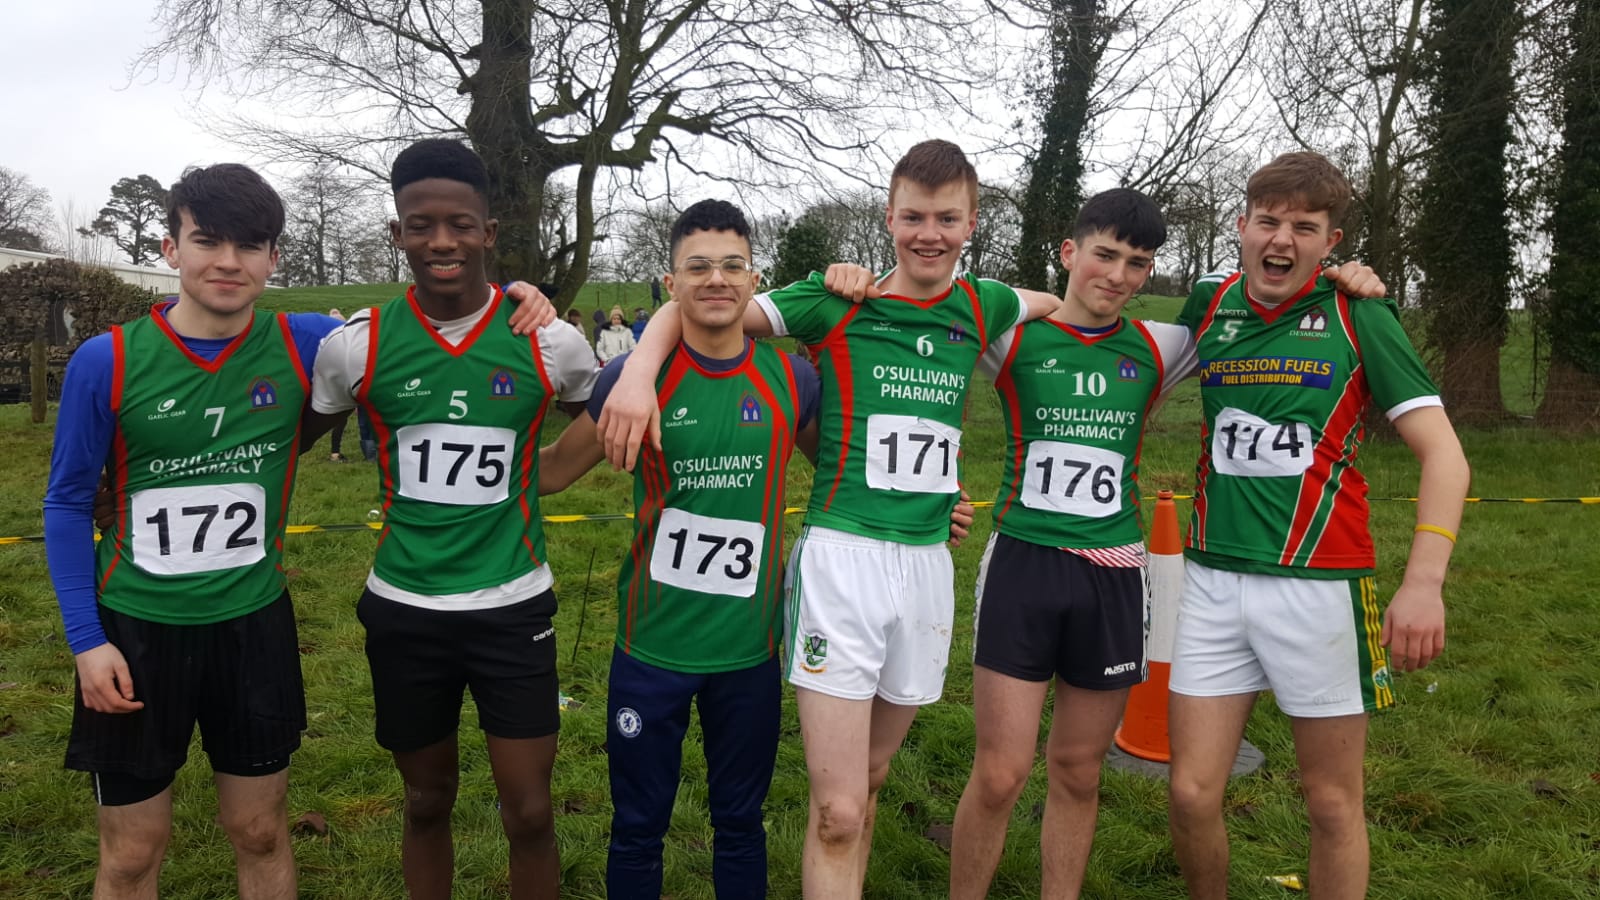 Billy Cunningham, Andy O'Doherty, Joao Da Silva, Diarmuid O'Flynn, David O'Brien and Danny Moriarty who participated in the North Munster Cross Country